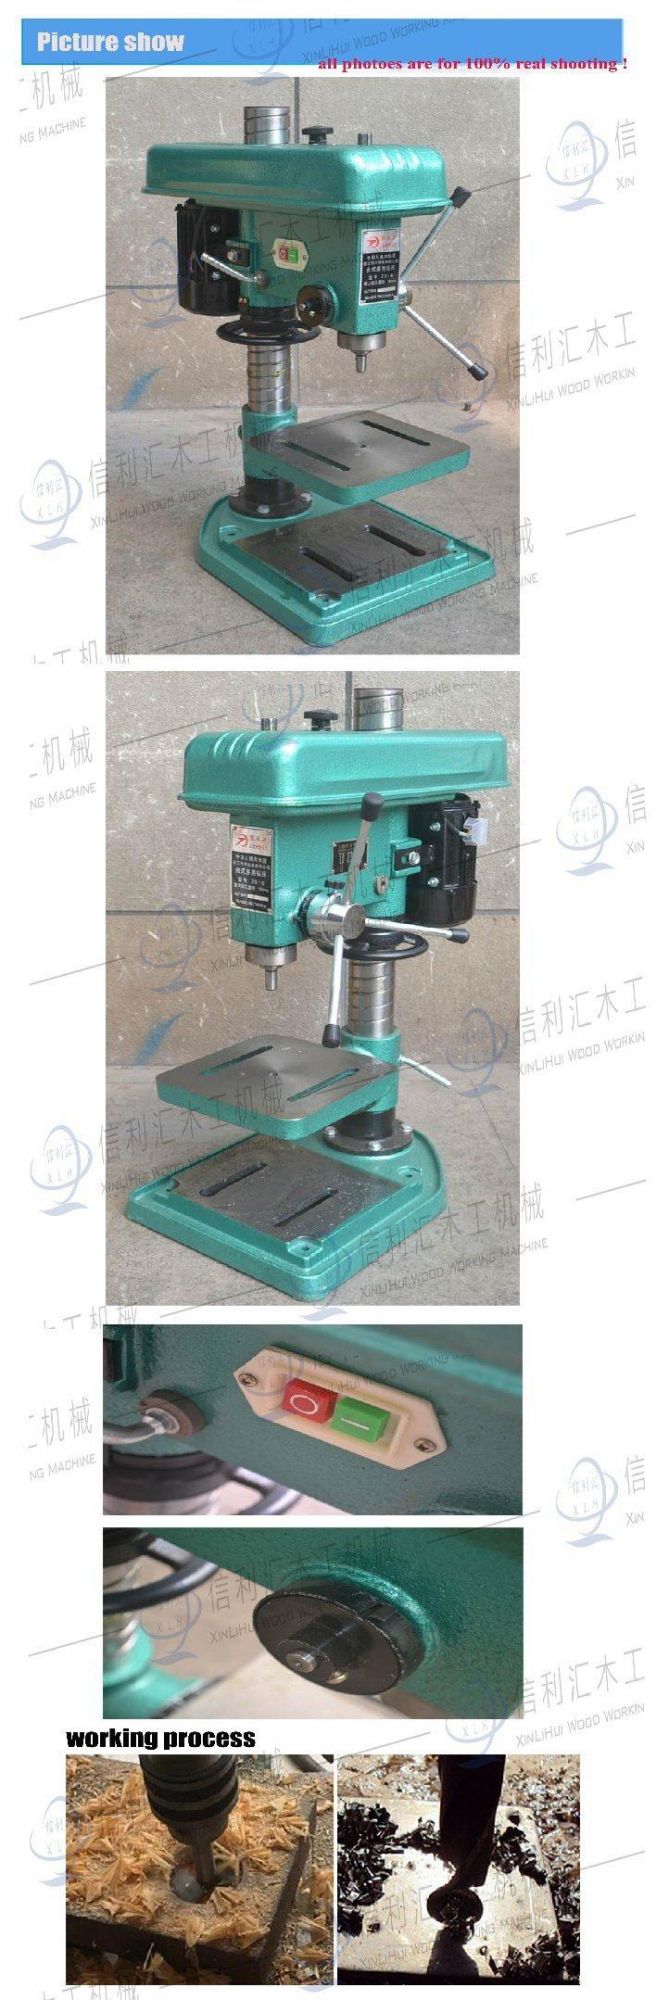 Bench Drill Press Variable Speed Vertical Drilling Machine/ Automatic 3 Spindles Drilling Bench-Type Coordinate Boring and Drilling Machine Made in China